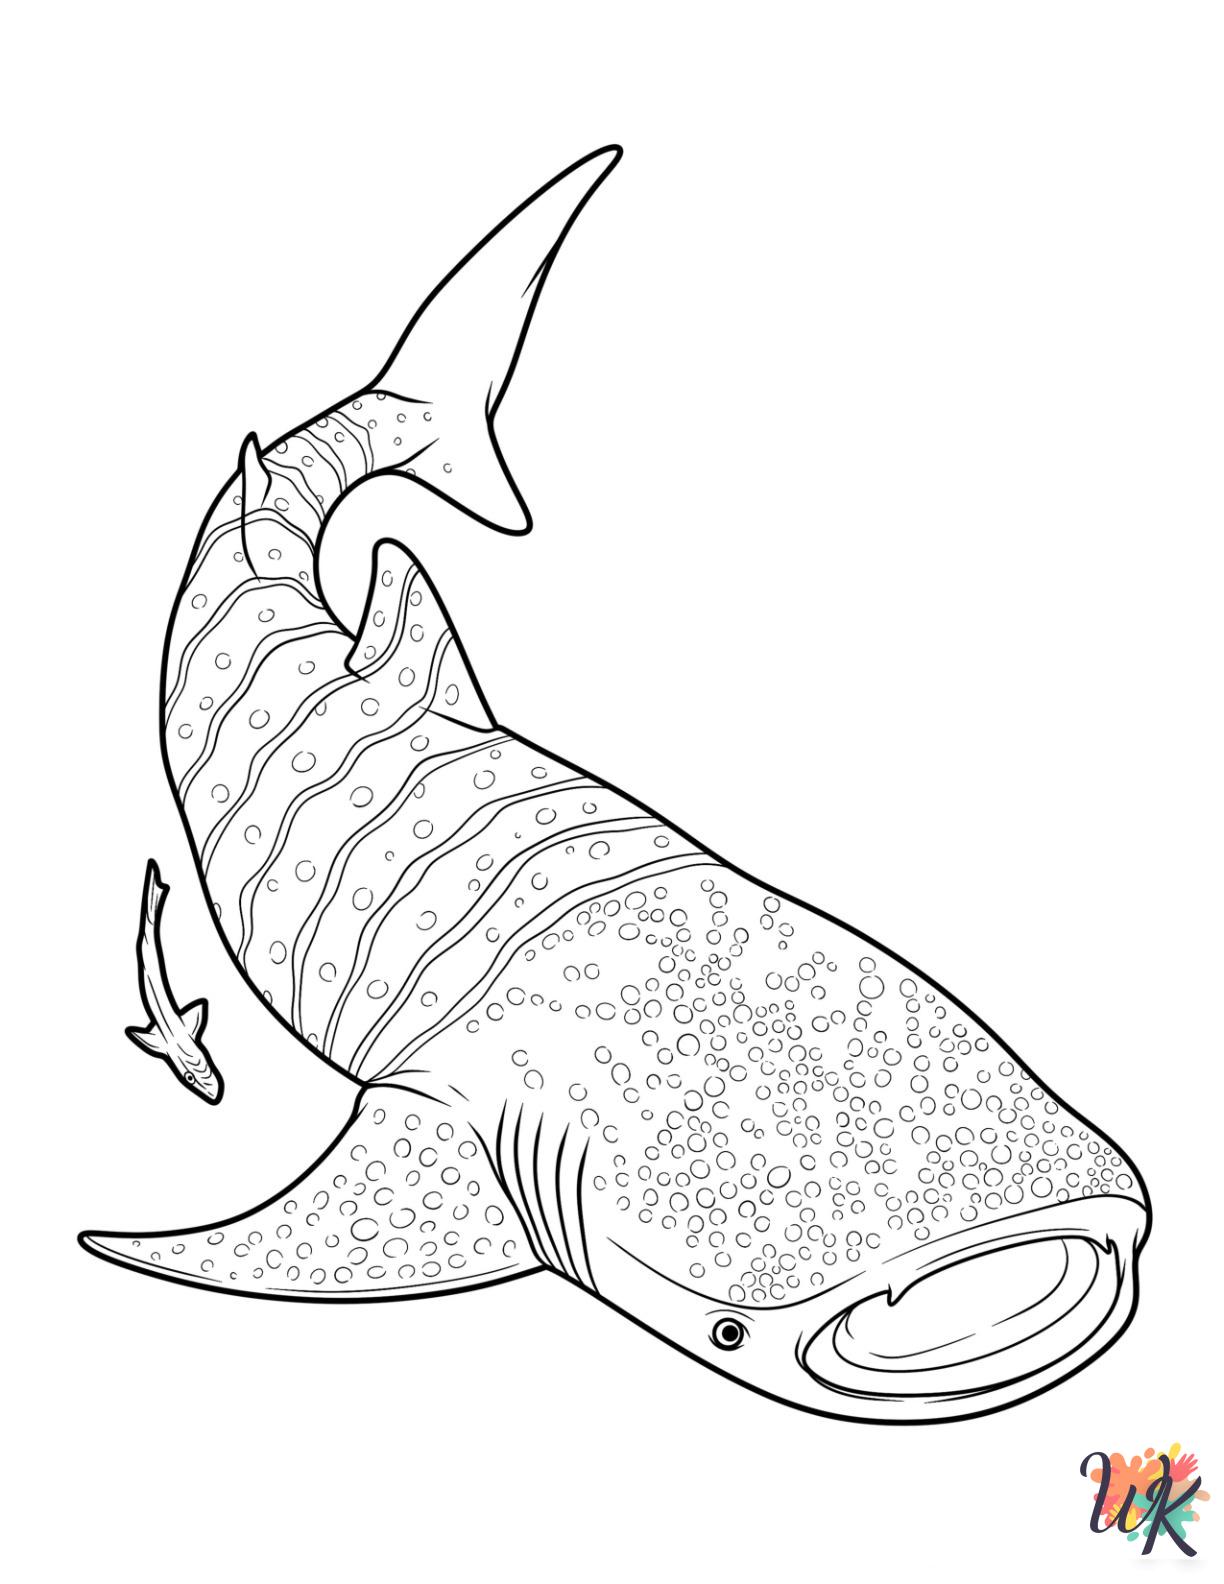 Shark coloring pages printable